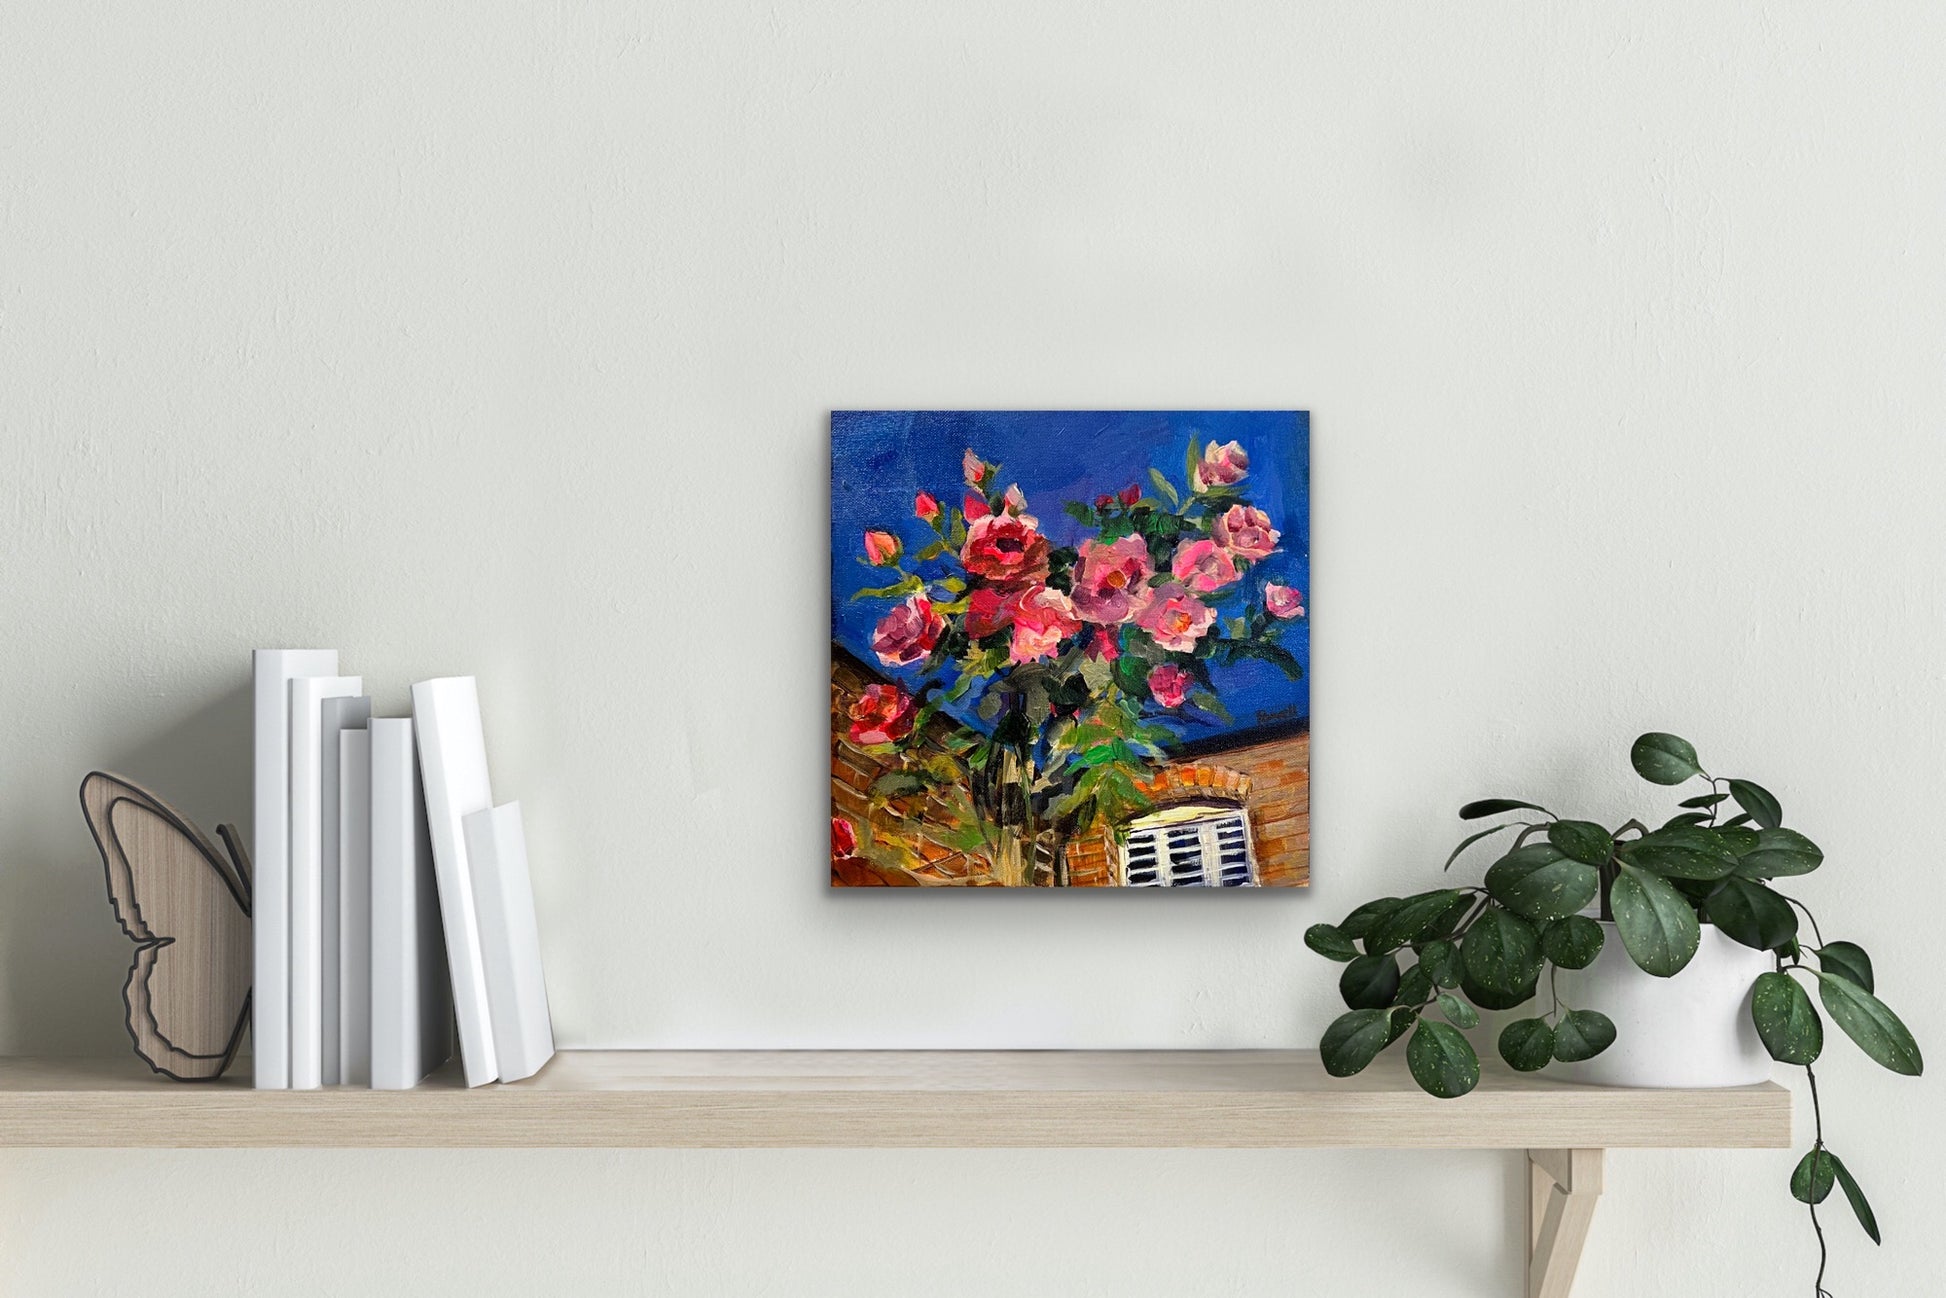 Original fine art painting by Worcester artist Margaret Powell entitled Debbie's Roses displayed against a white wall above a shelf